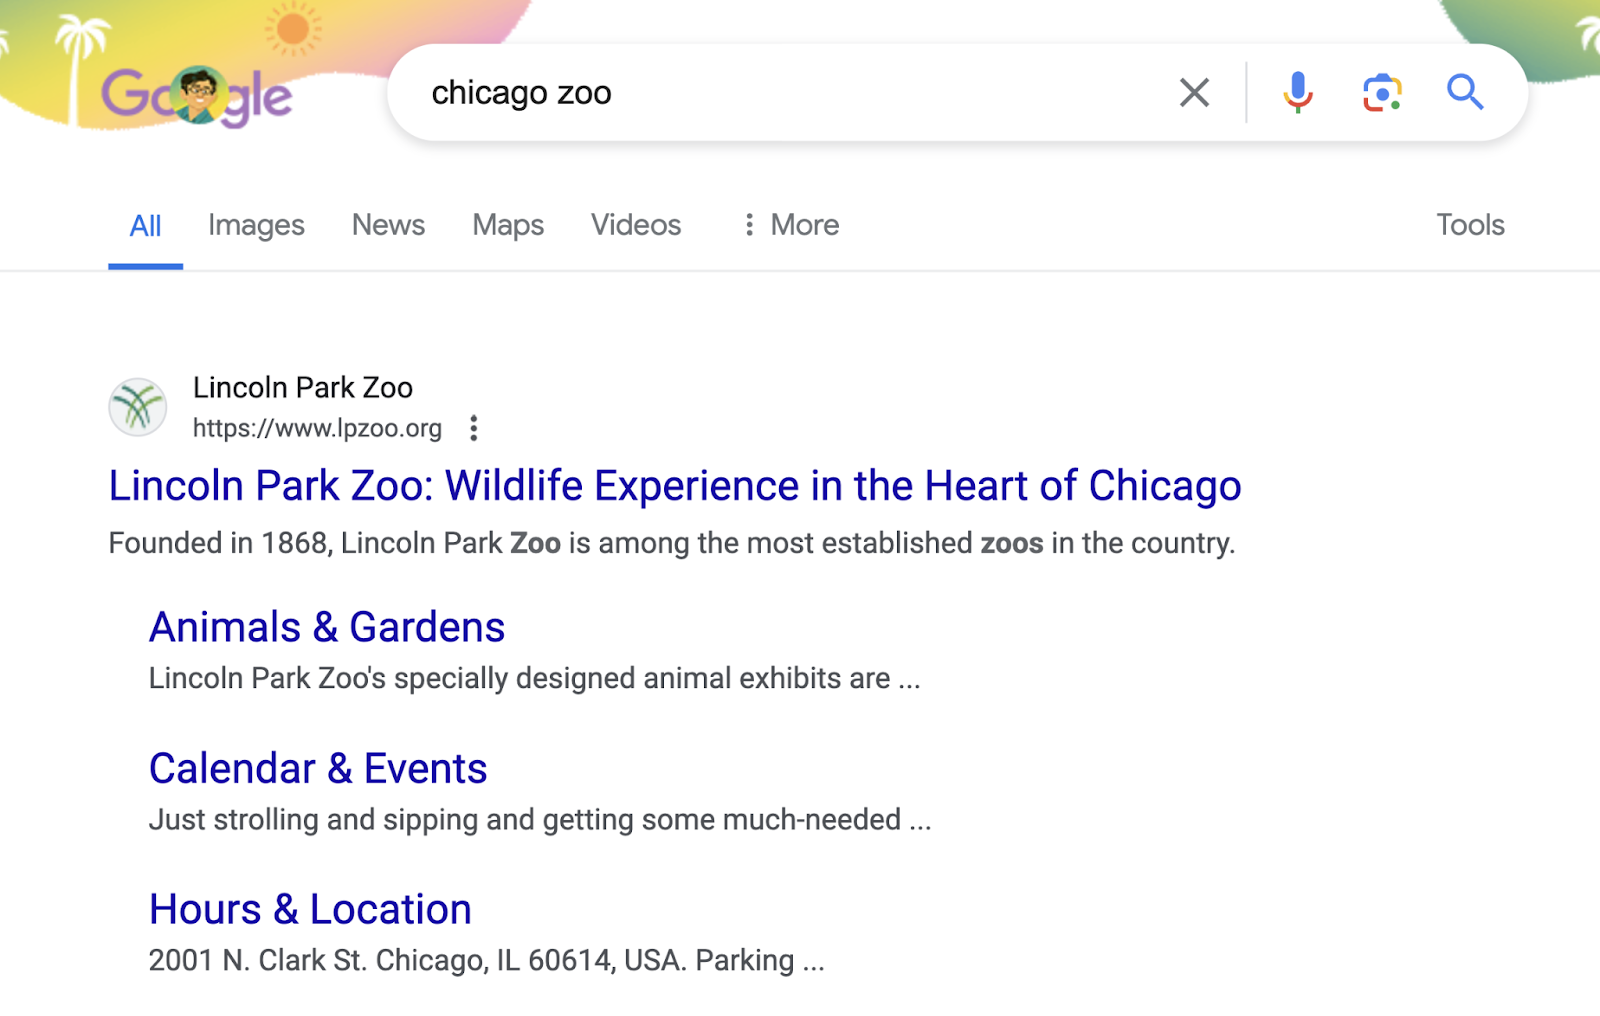 search for "chicago zoo" shows an organic, unpaid result for Lincoln Park Zoo